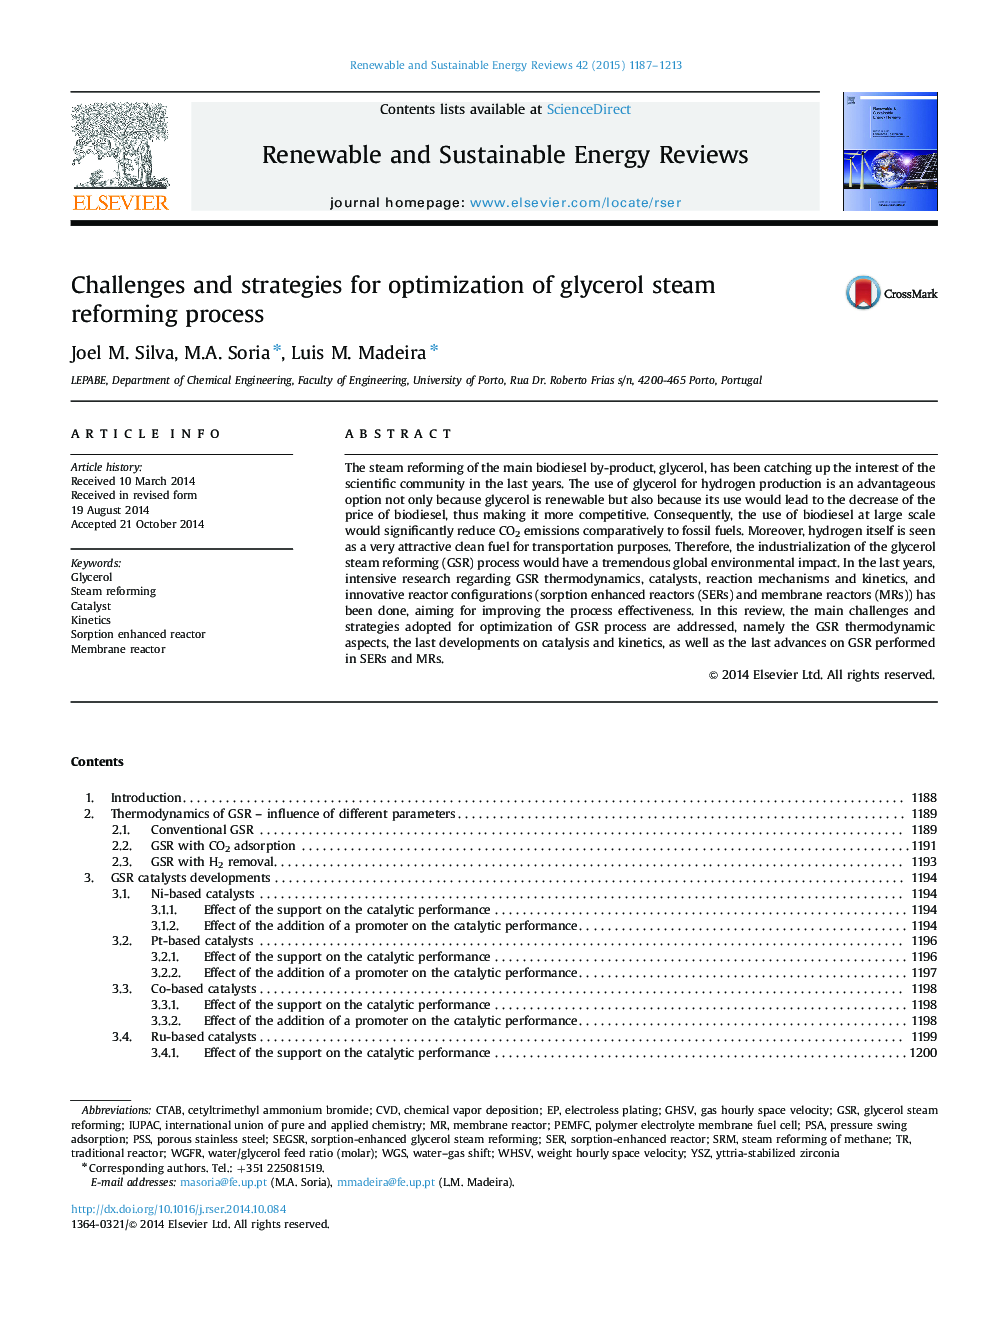 Challenges and strategies for optimization of glycerol steam reforming process